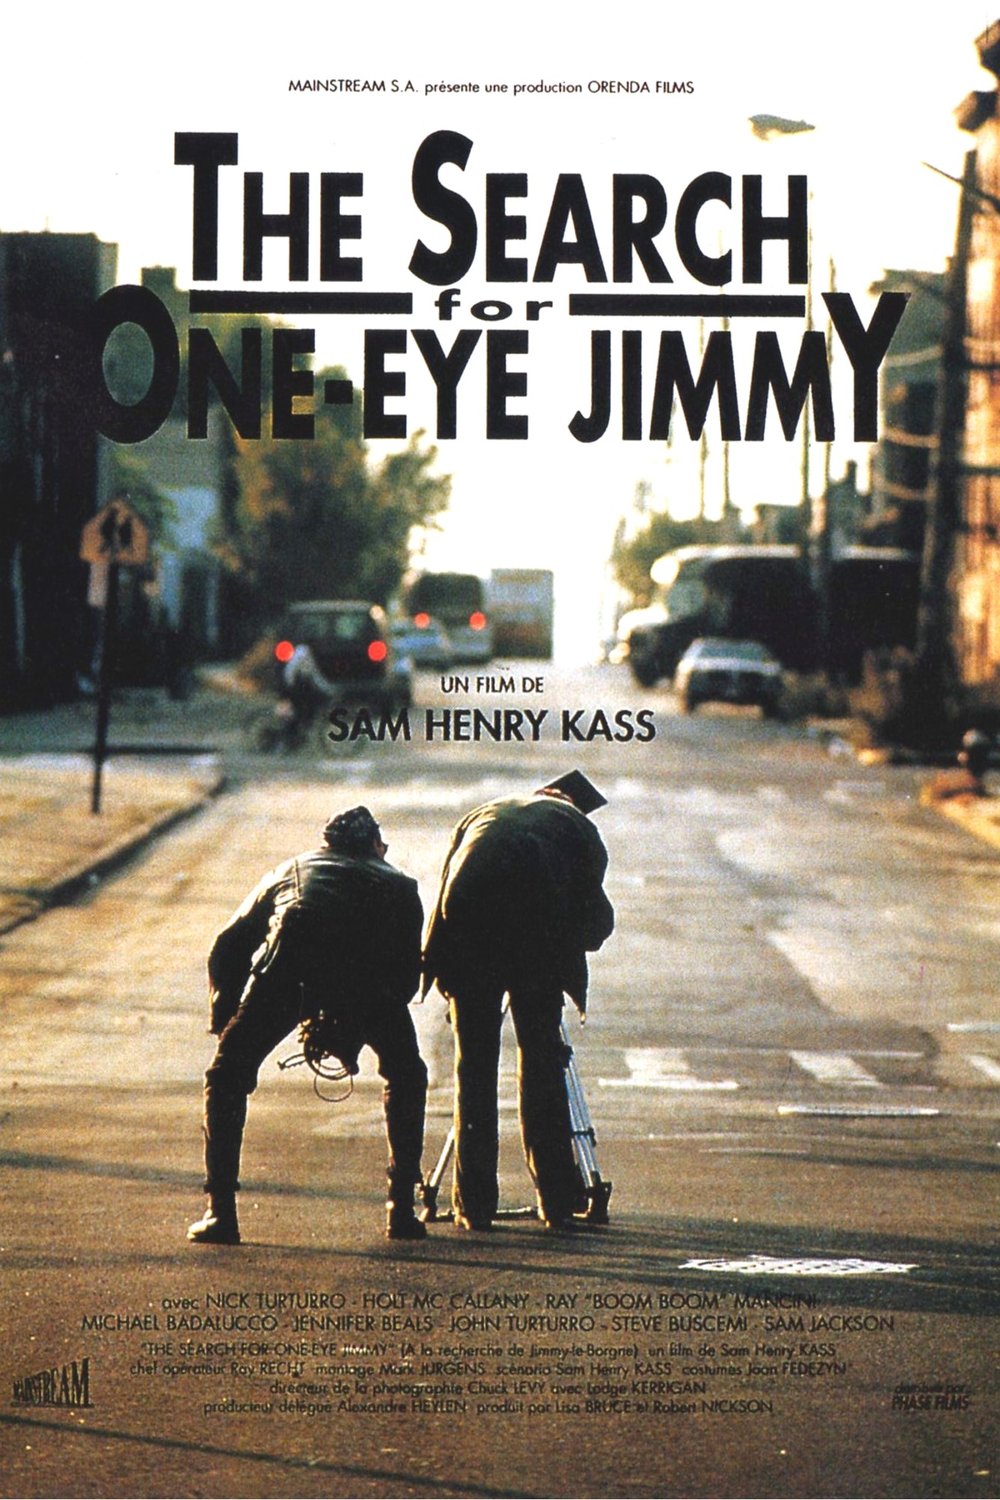 L'affiche du film The Search for One-eye Jimmy